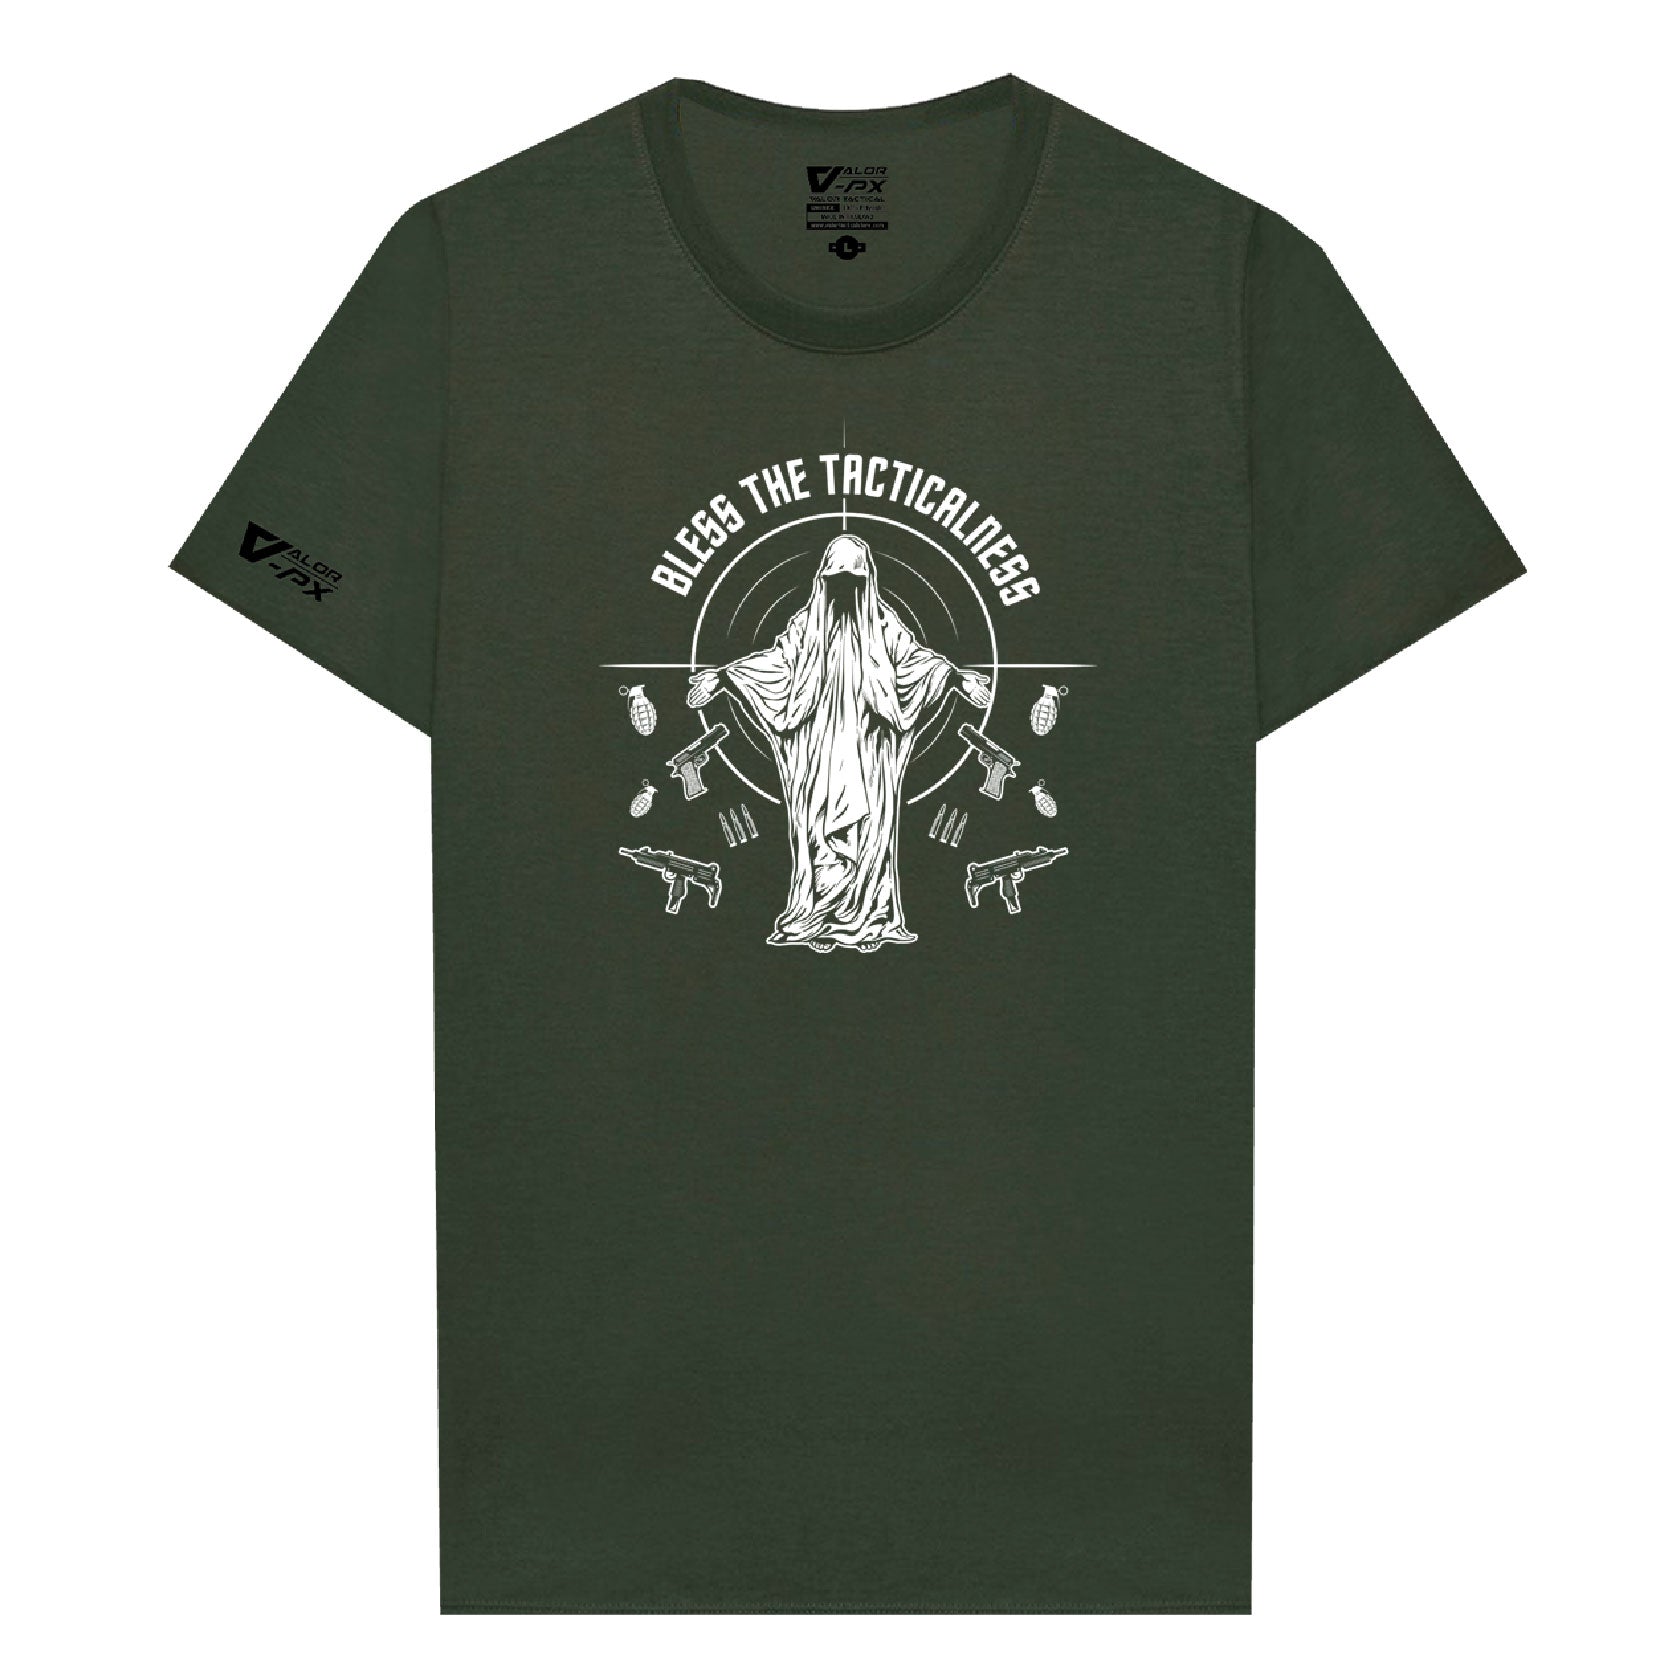 Valor PX Bless The Tacticalness T-Shirt